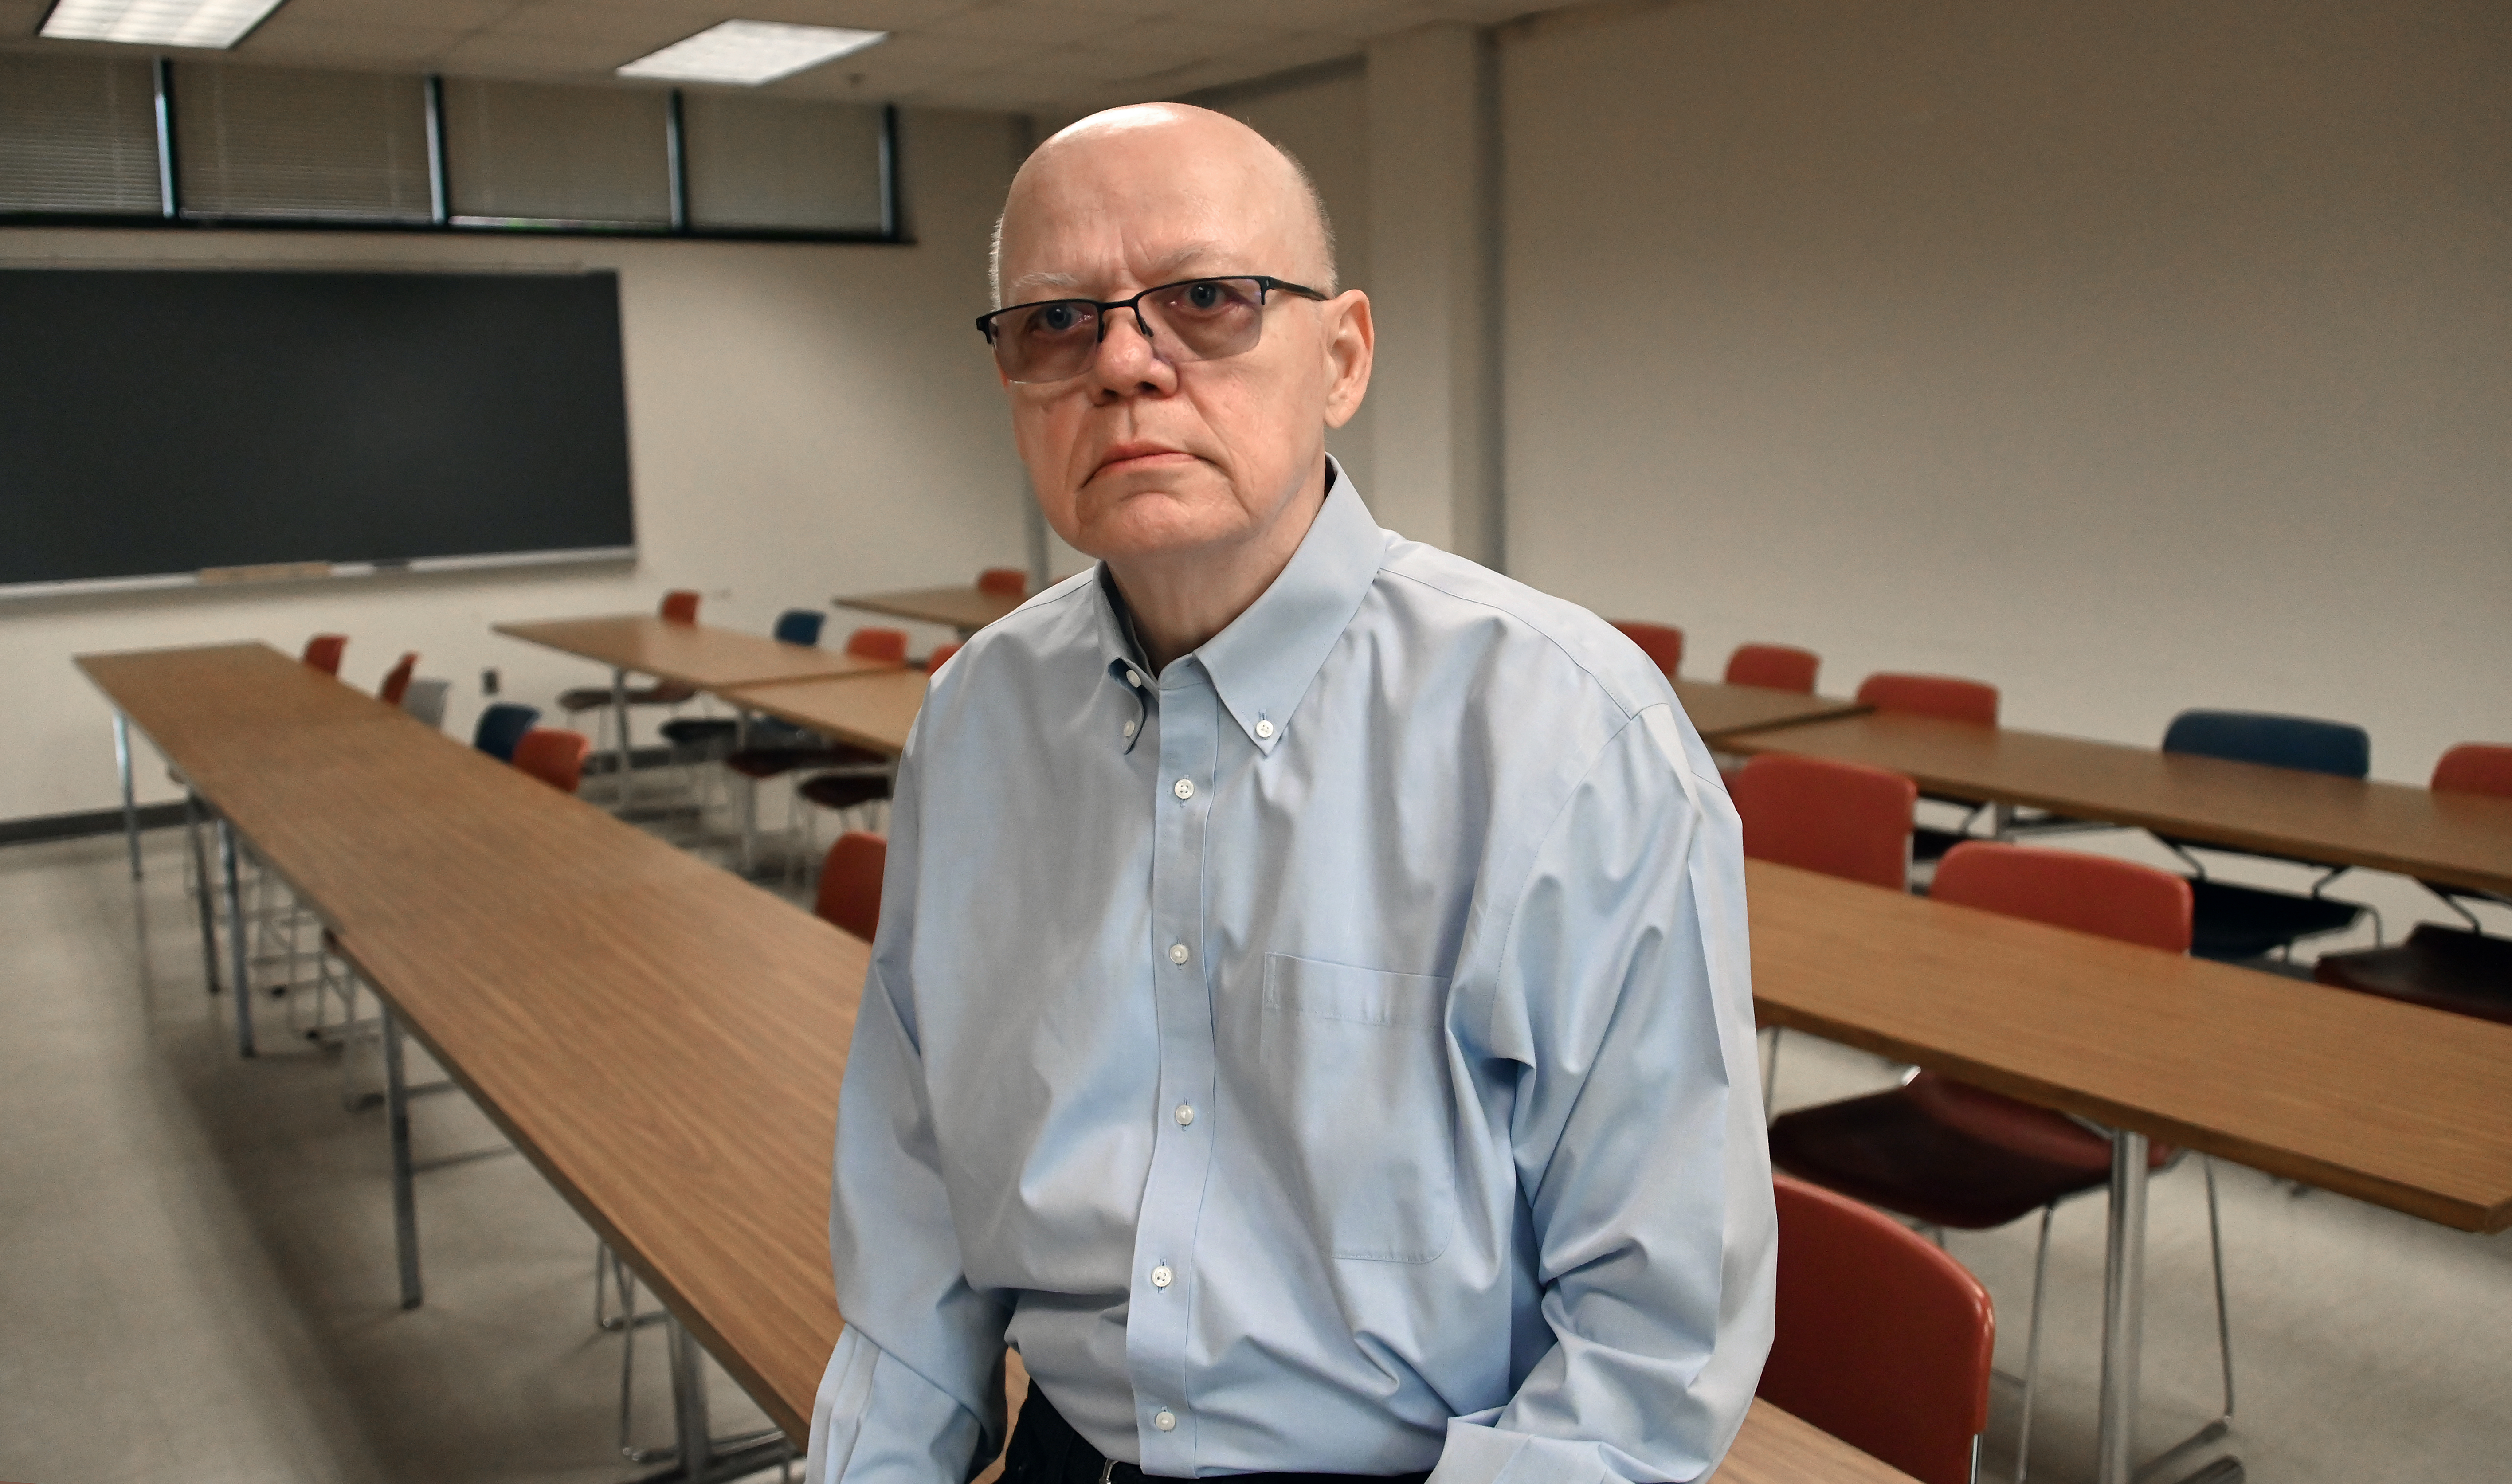 Mark Varner, a professor emeritus of Animal Sciences at the University of Maryland, in a classroom in the Animal Sciences building. Varner, who retired in 2011, is among 55,000 state retirees who will lose their state prescription drug coverage next year when they will be switched to Medicare. Varner, who had a heart transplant, worries that he'll struggle to afford his medication under Medicare Part D and some will not be included in Part D's formulary. (Kim Hairston/Staff).